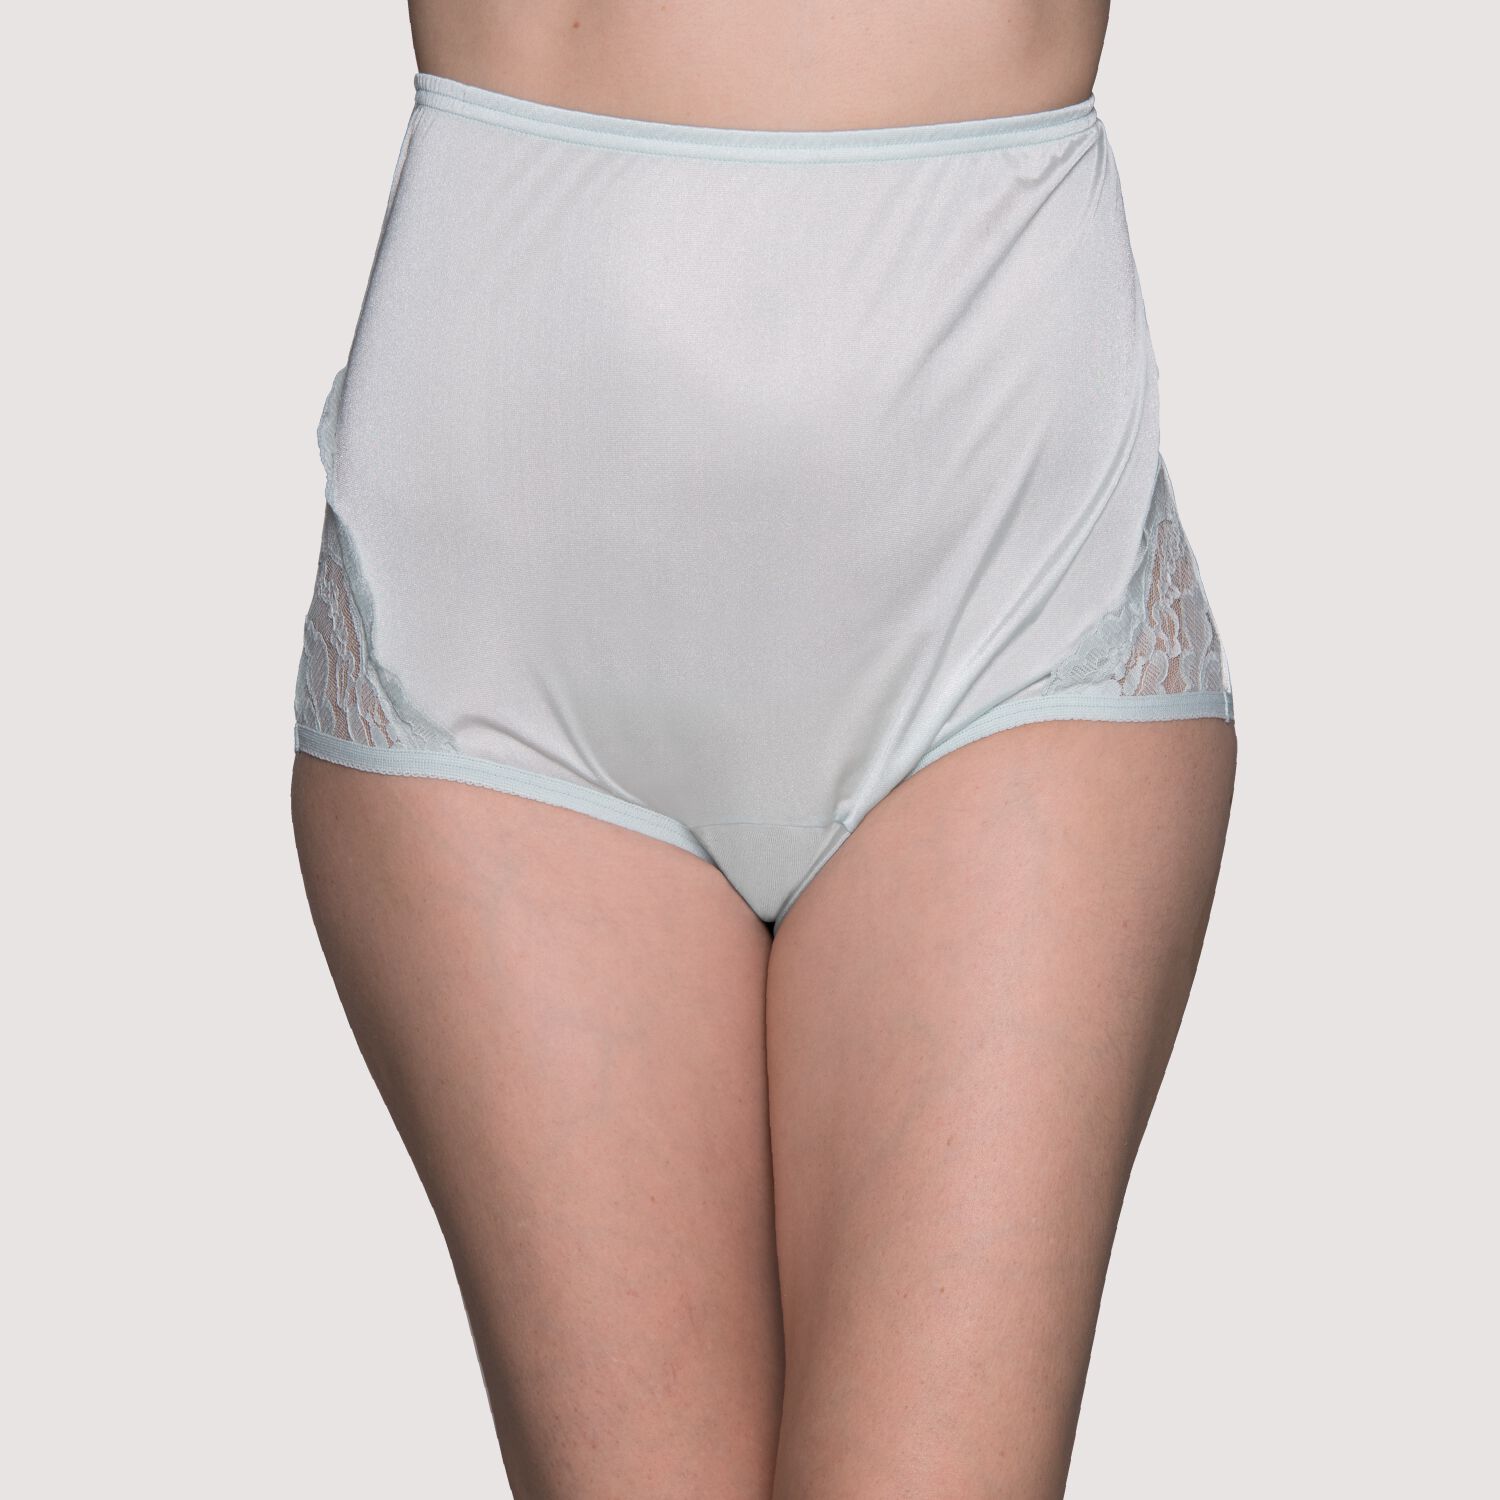 The Senior Shop Classic Fit Banded Leg Granny Panties - 3 Pack